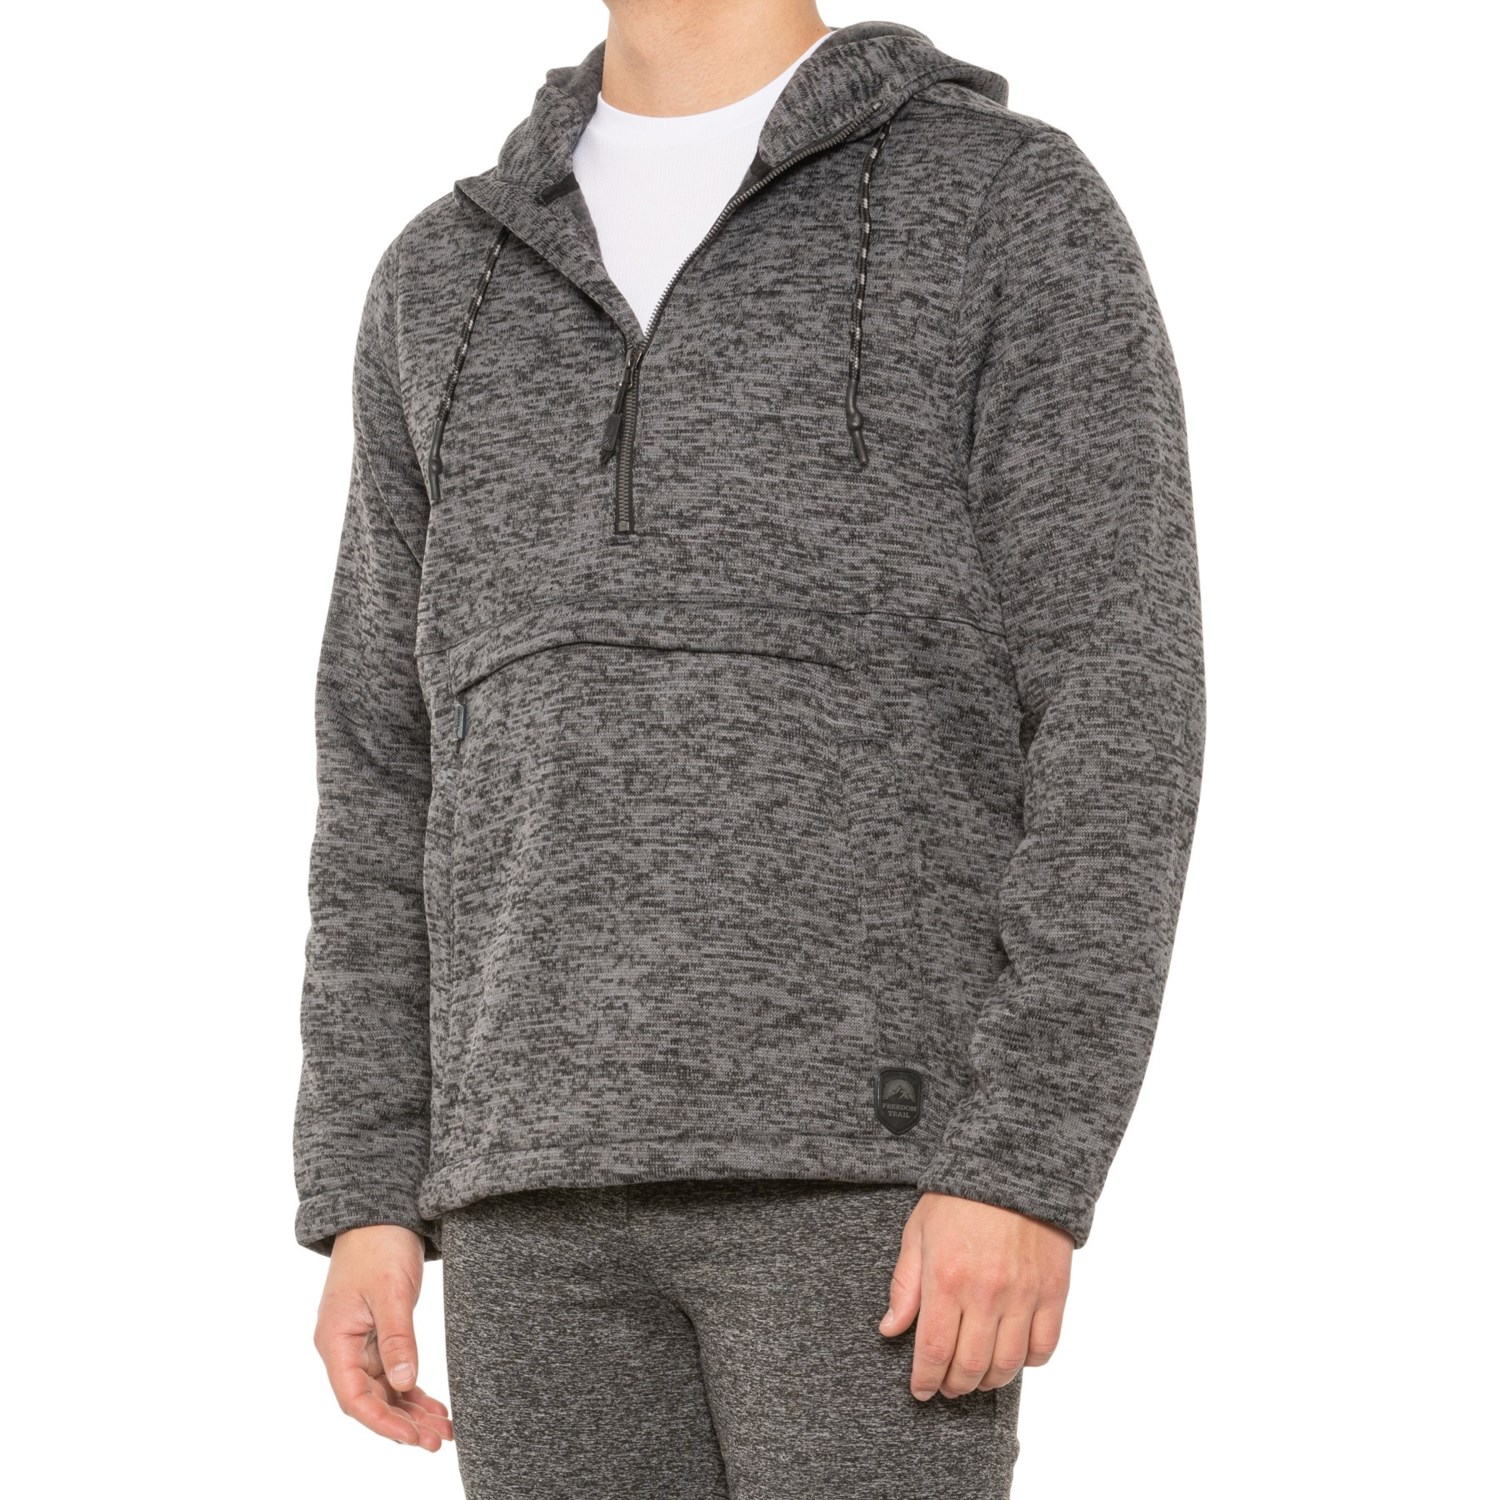 Freedom Trail by Kyodan Sweater-Knit Hoodie - Zip Neck - Save 56%